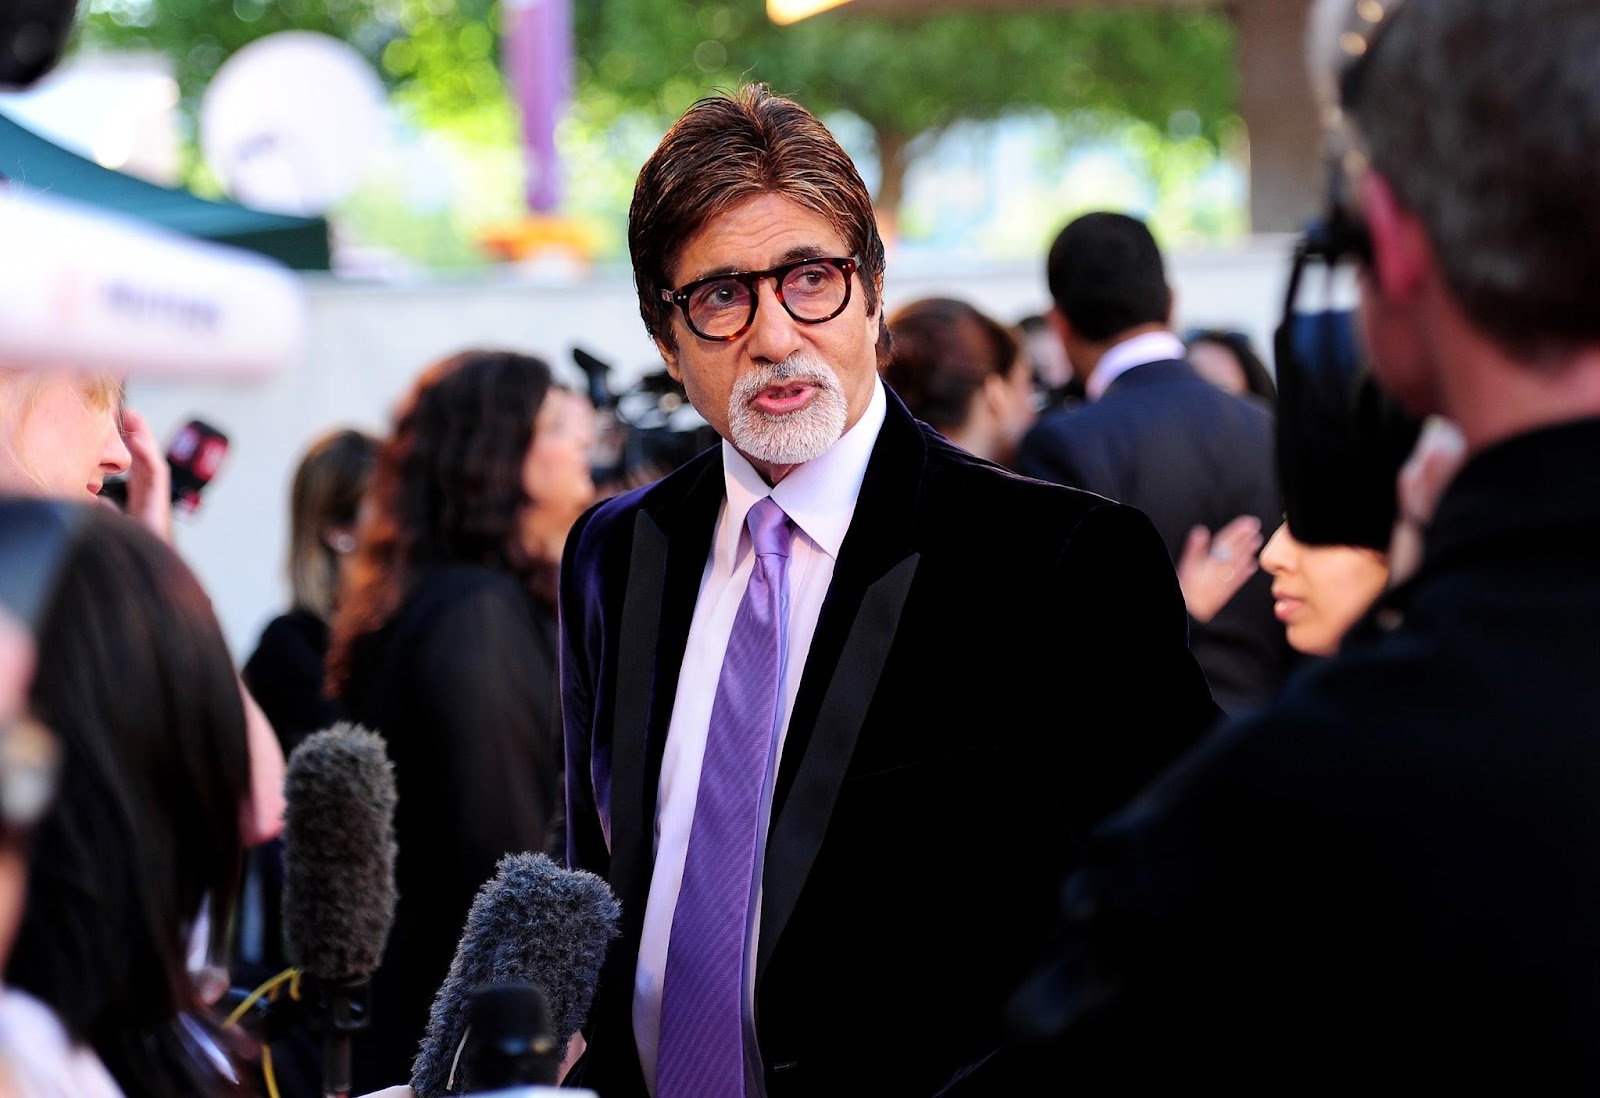 Amitabh Bachchan Gets Hit with $130,000 Tax Bill for NFTs
